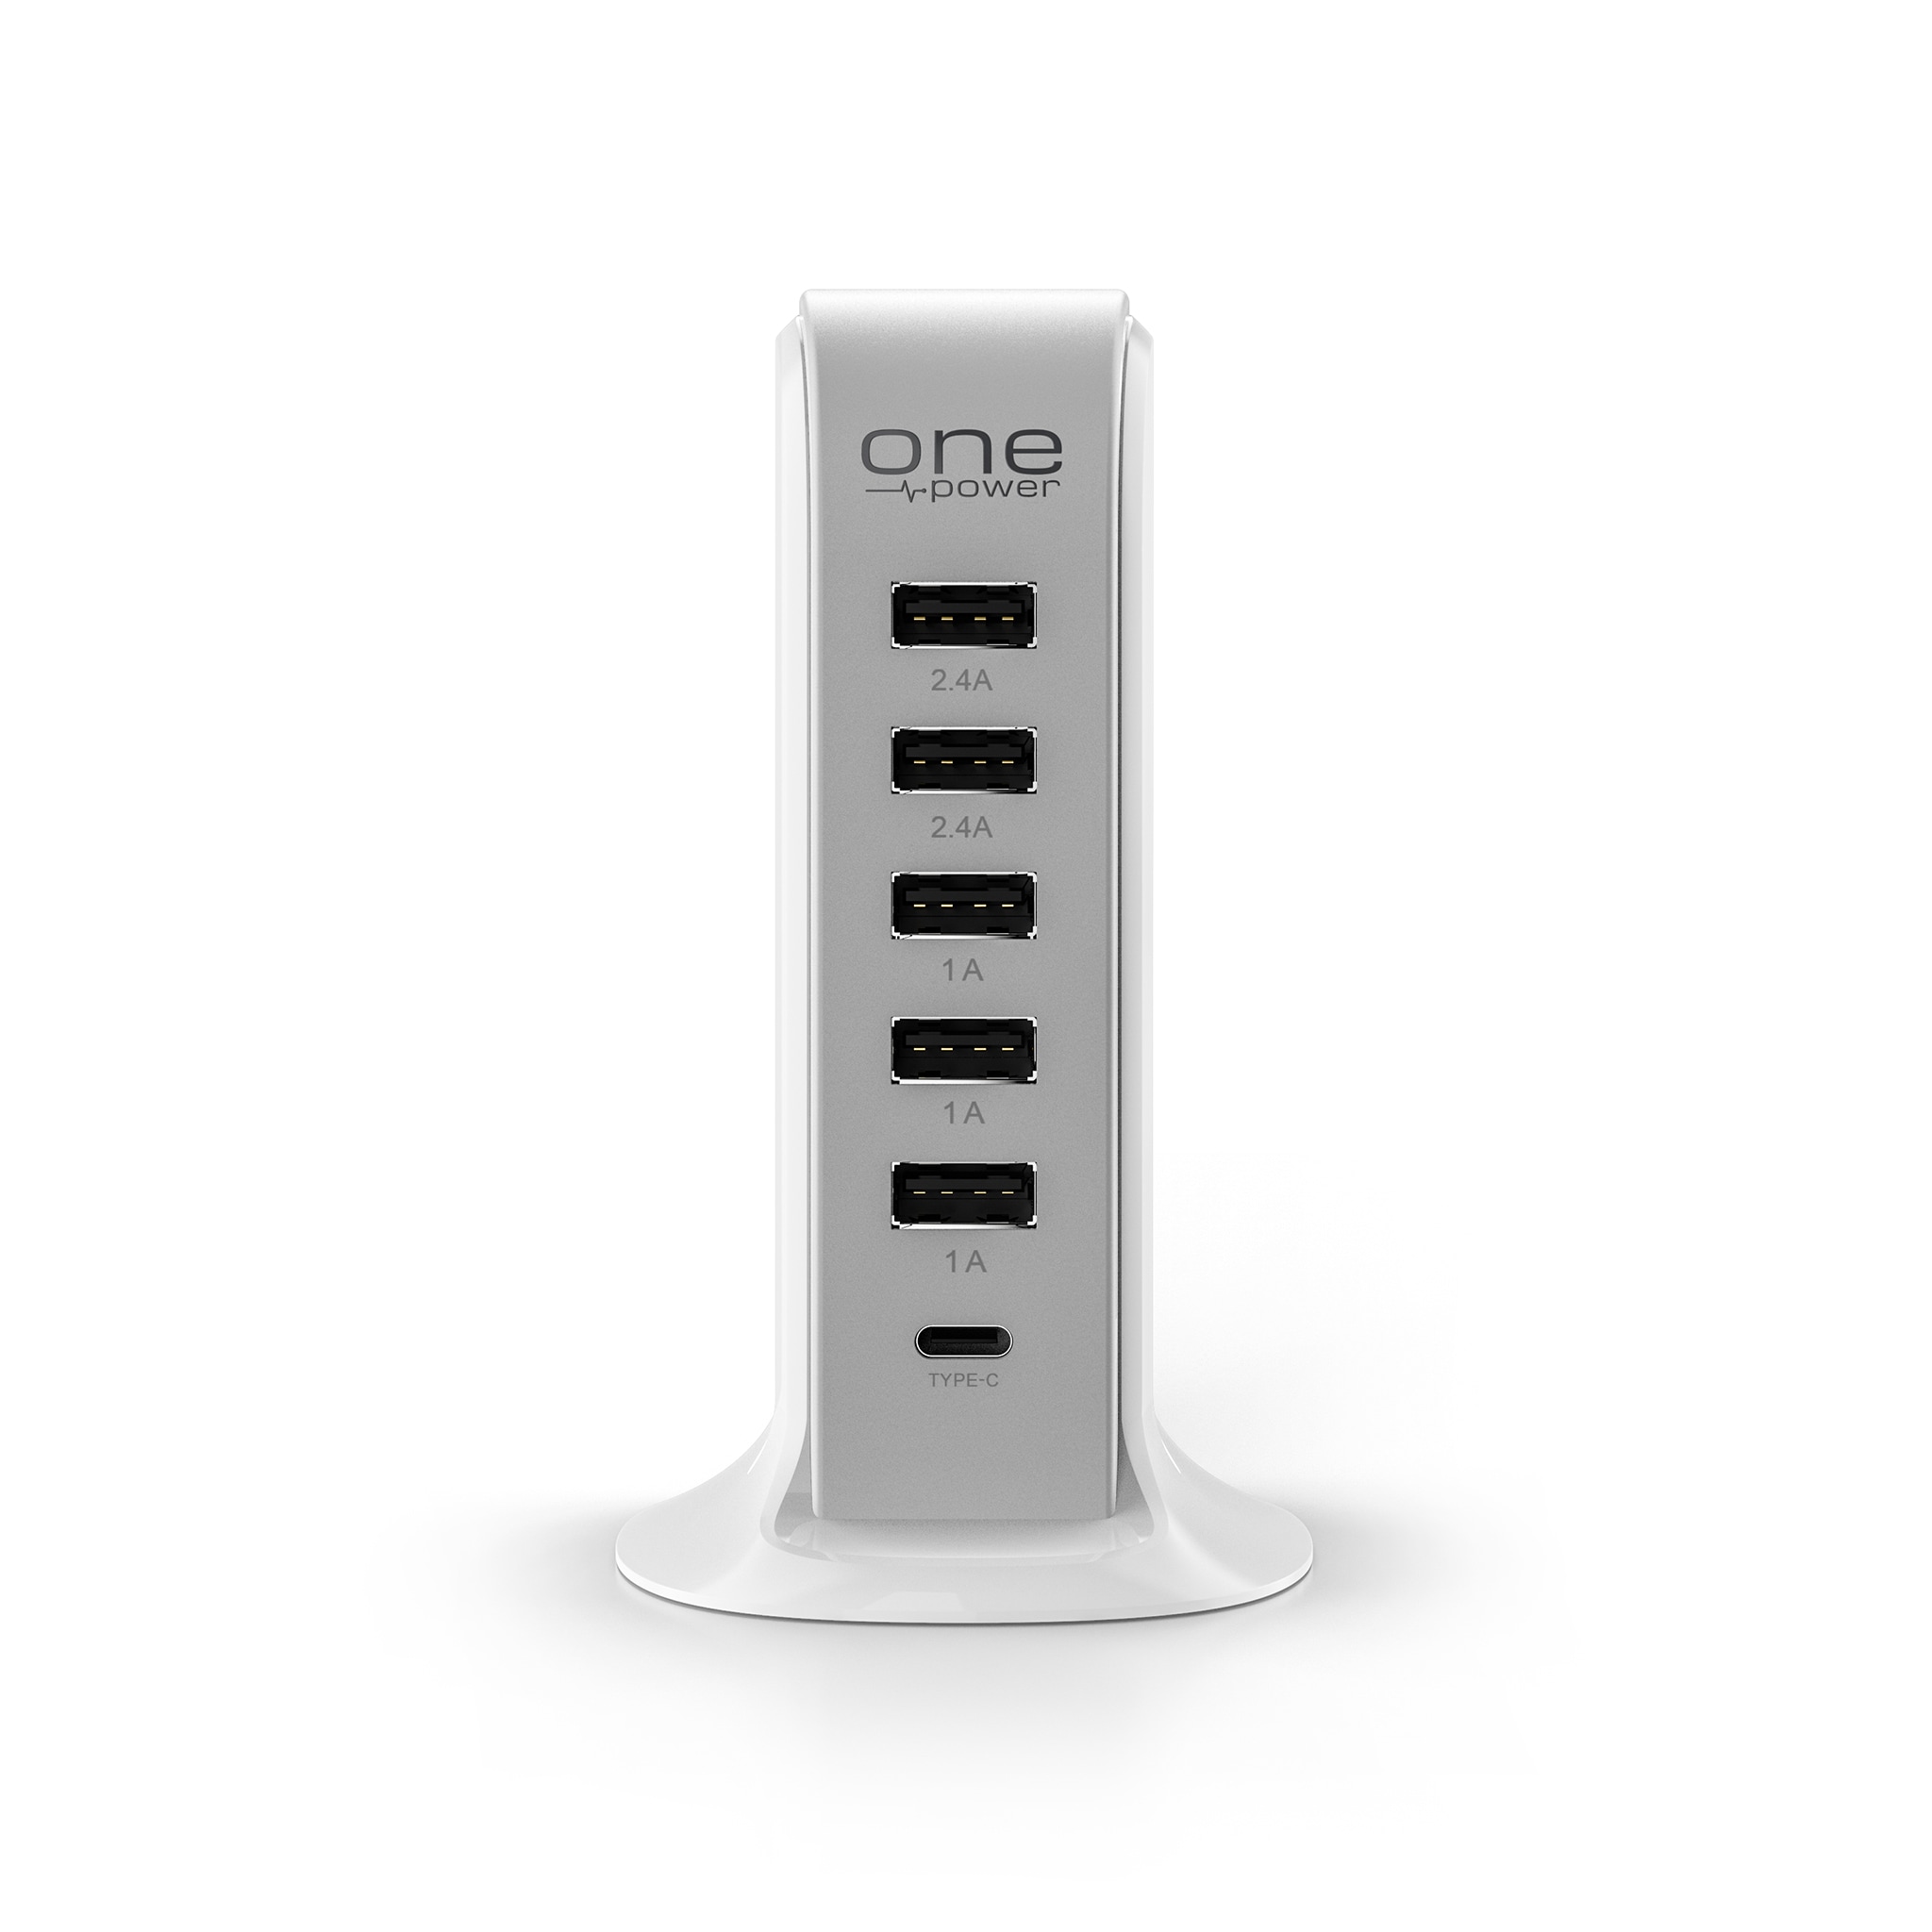 Promounts 5 USB-A 1 USB-C Charging Station by One Power - White, 5 USB Ports, 2.4 Amp High Speed Charging, Compatible with Samsung, Apple, Android